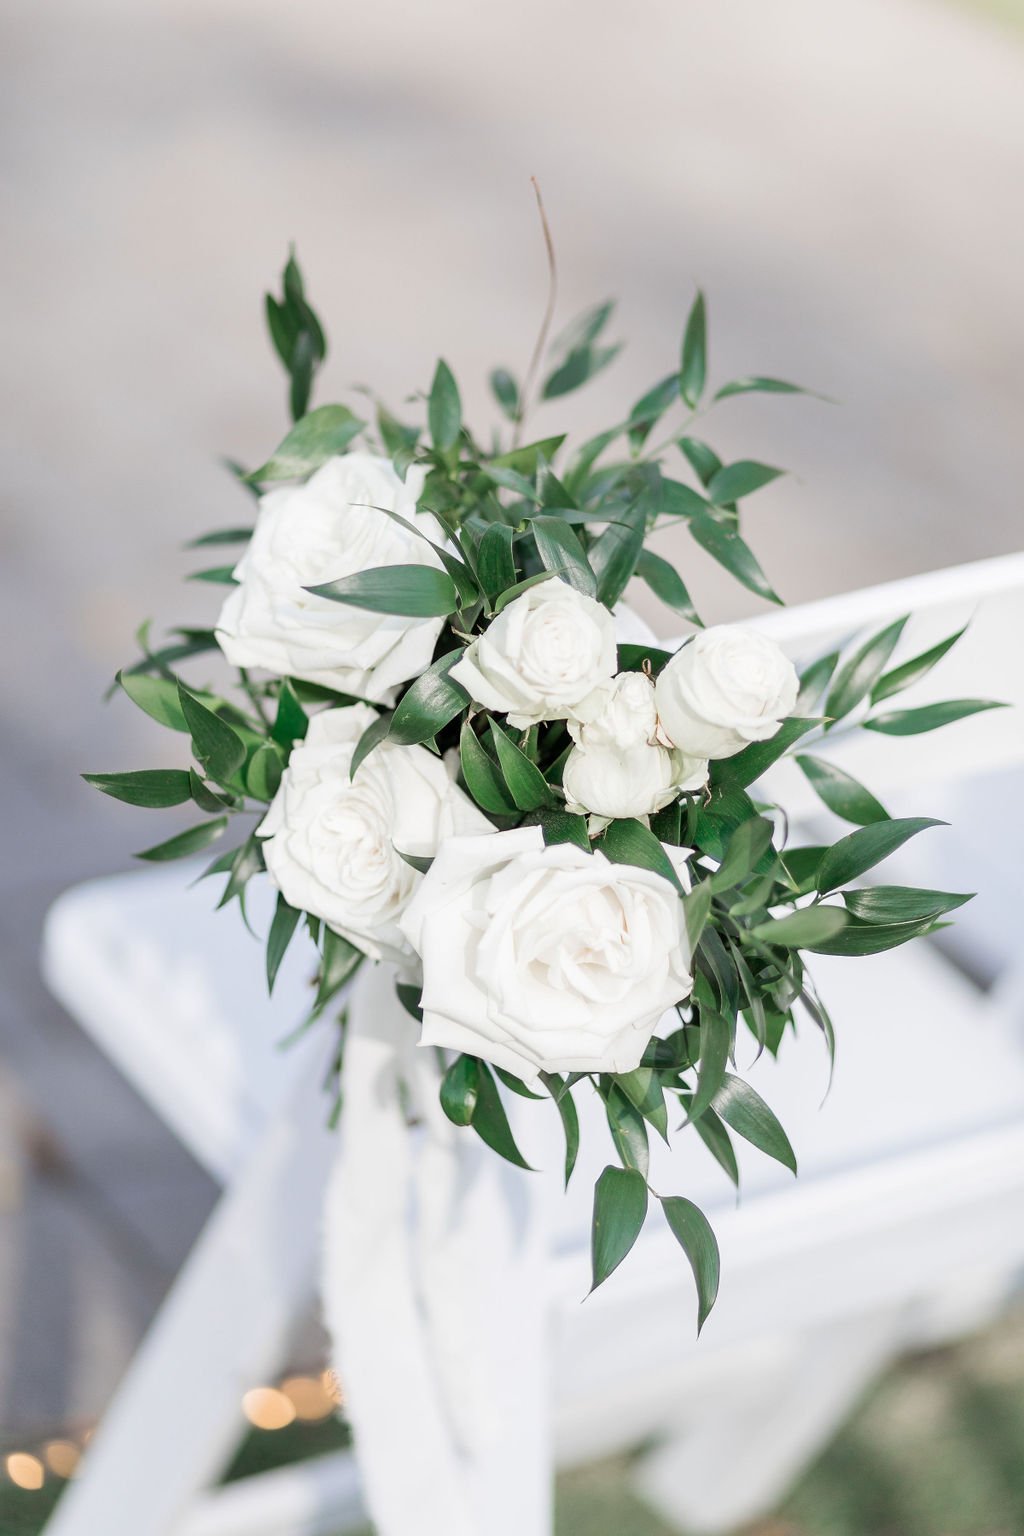 rachel-and-jarrods-classic-white-wedding-florals-designed-by-savannah-florist-ivory-and-beau-for-elegant-wedding-at-the-mackey-house-11.JPG